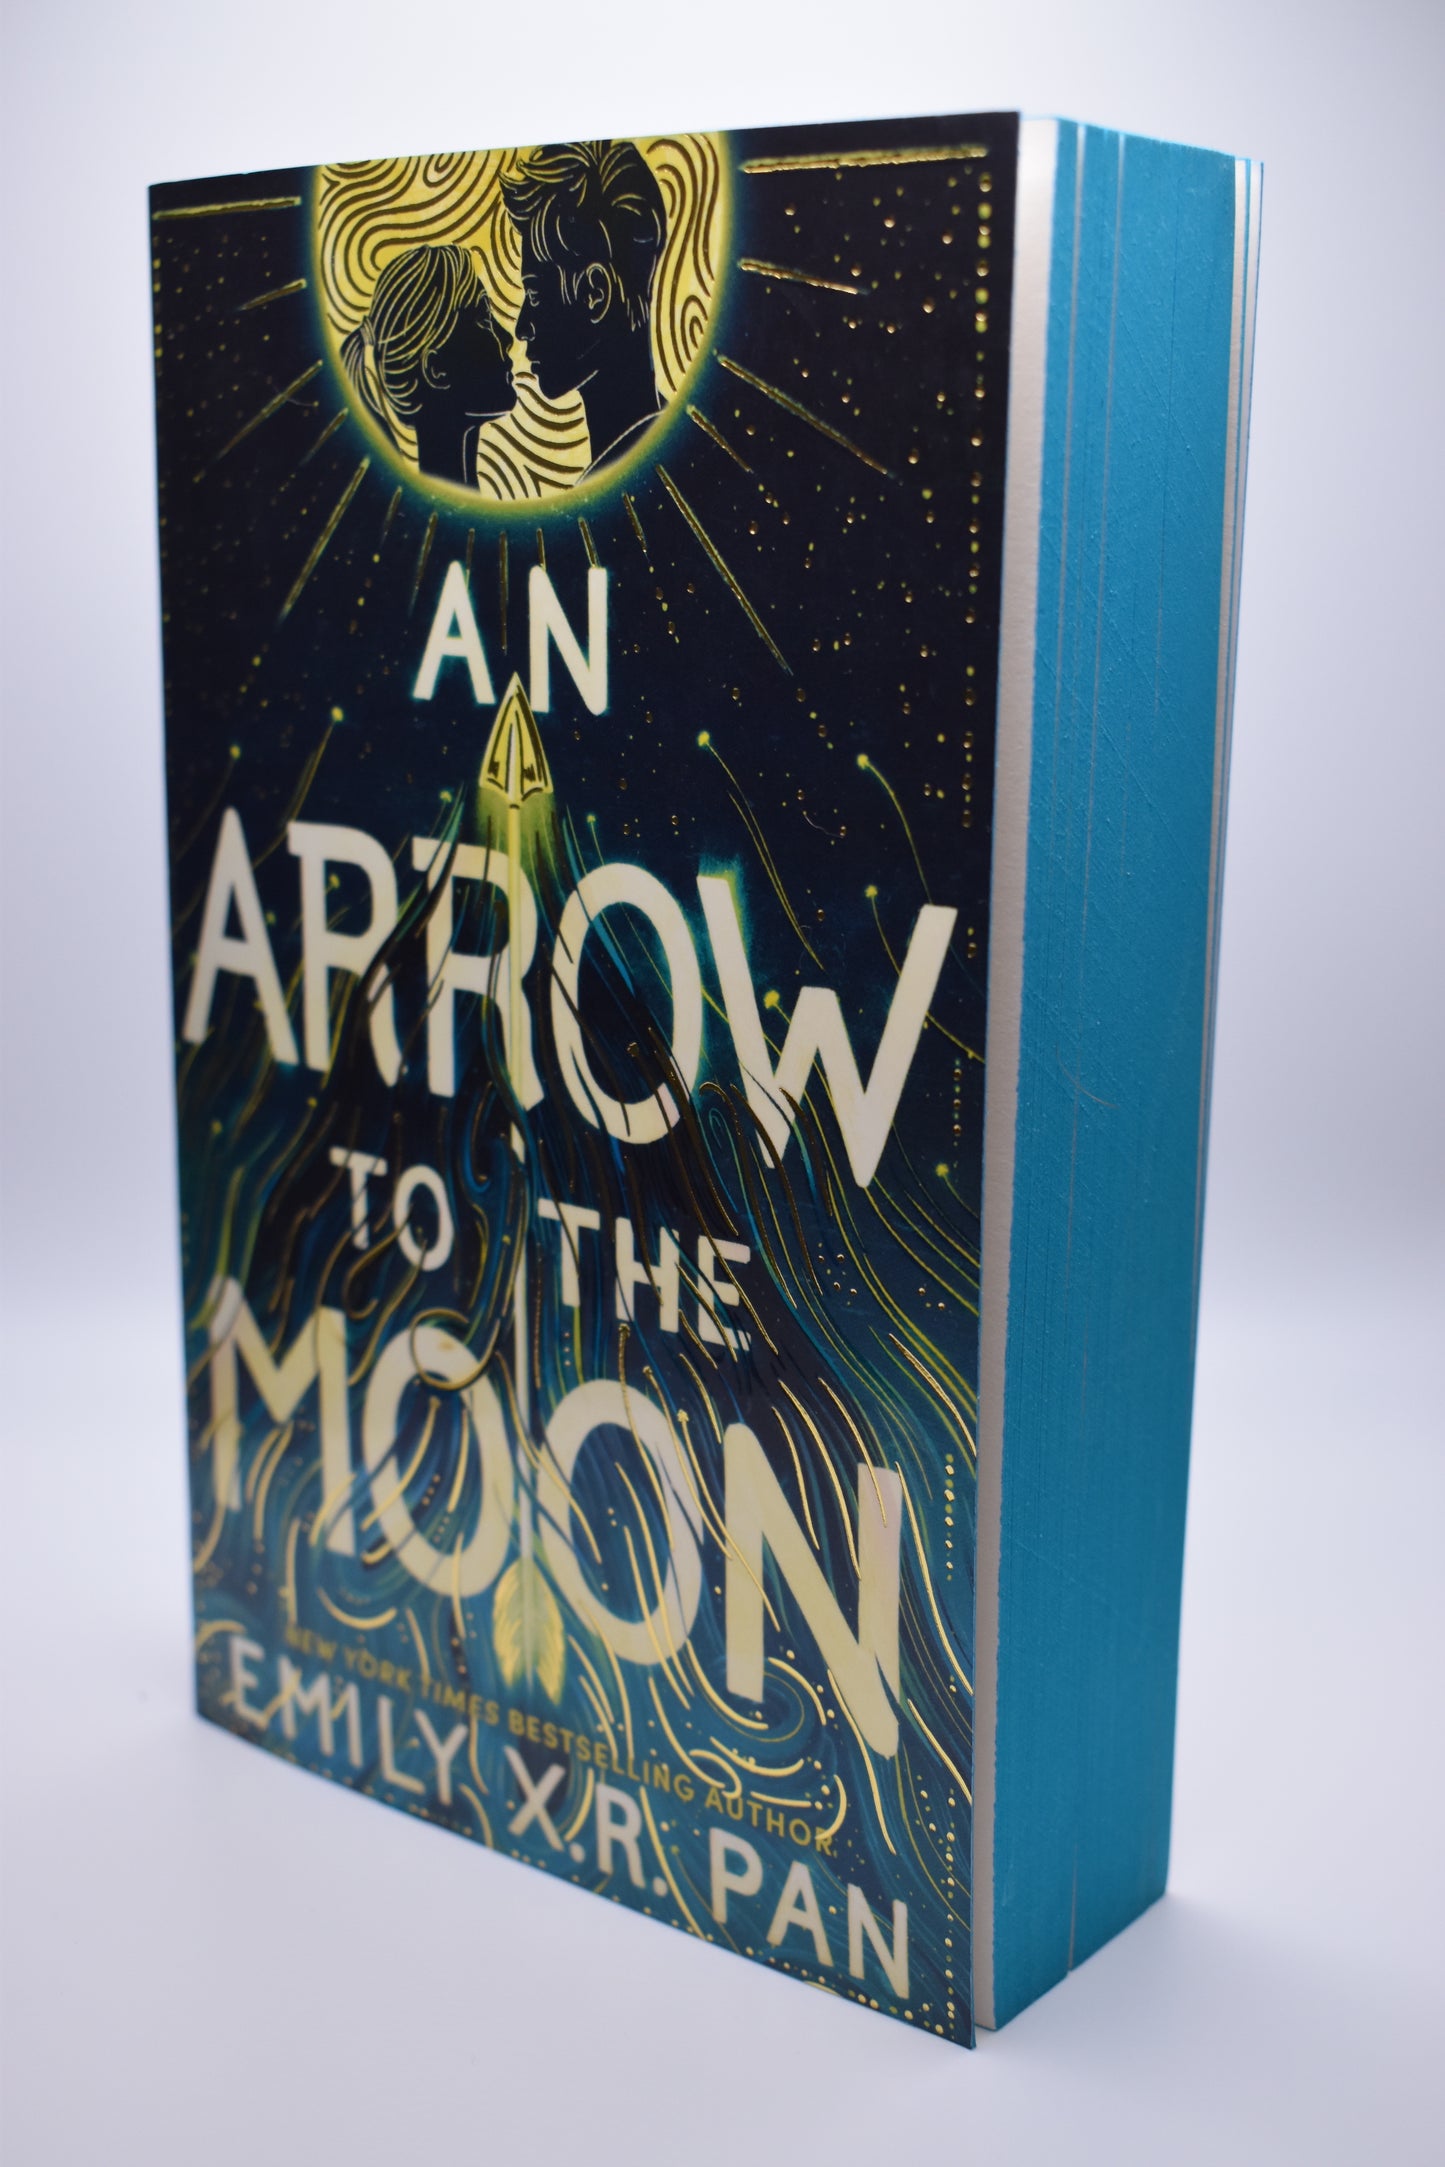 An Arrow to the Moon by Emily XR Pan (Signed FairyLoot Edition - Paperback)